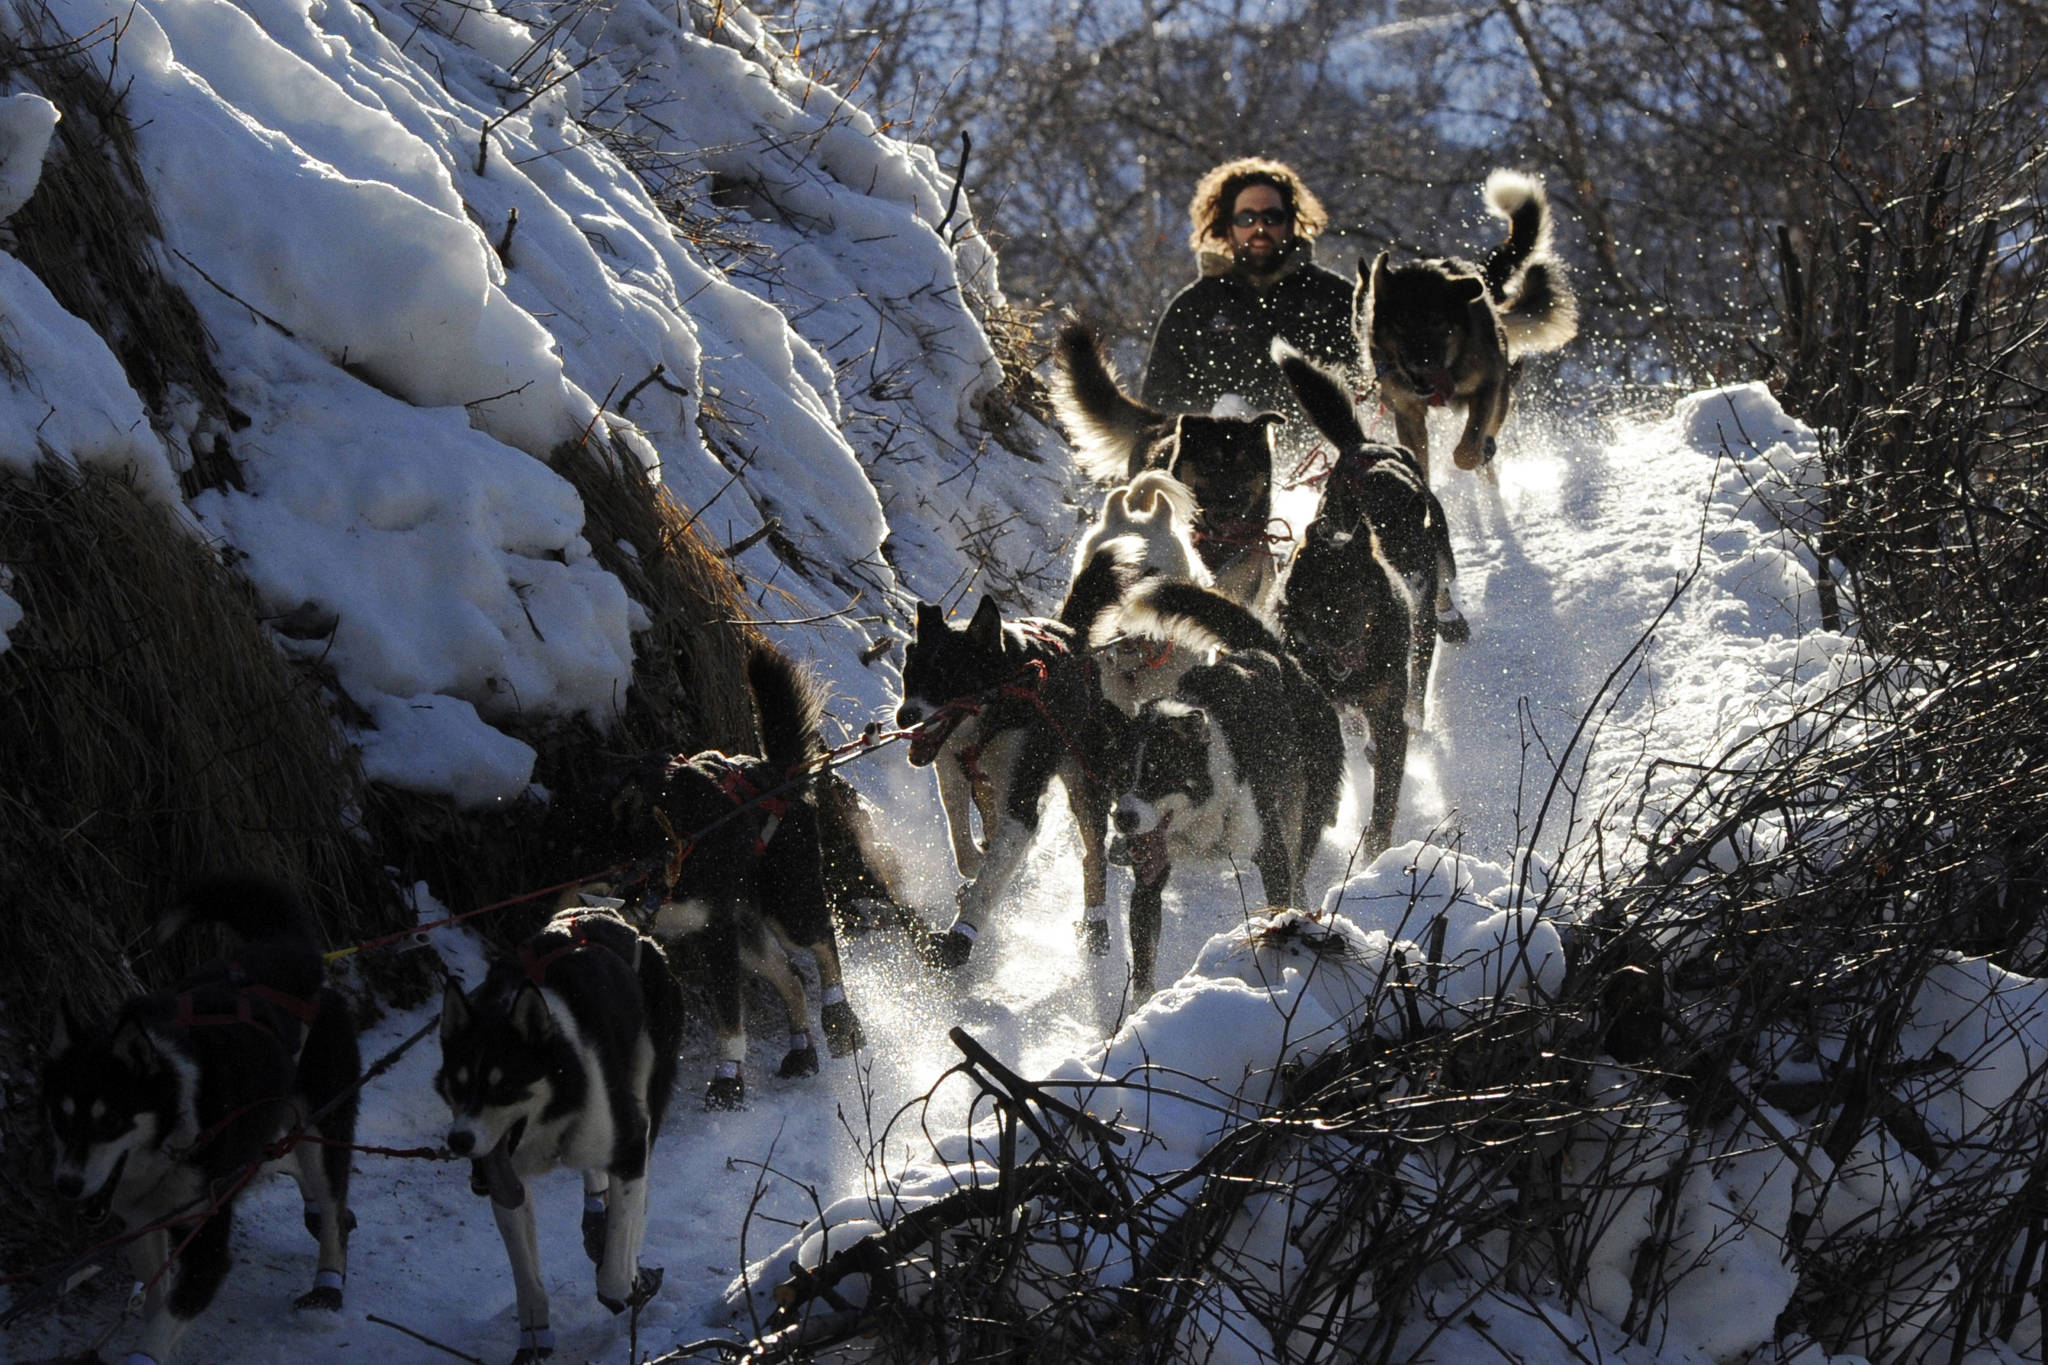 Rick Casillo comes over the last drop as he comes down the Happy River Steps heading to Puntilla Lake, Alaska, during the 2014 Iditarod Trail Sled Dog Race. The world’s most famous sled dog race starts Sunday, March 7, 2021, without its defending champion in a contest that will be as much dominated by unknowns and changes because of the pandemic as mushers are by the Alaska terrain. (Bob Hallinen / Anchorage Daily News)